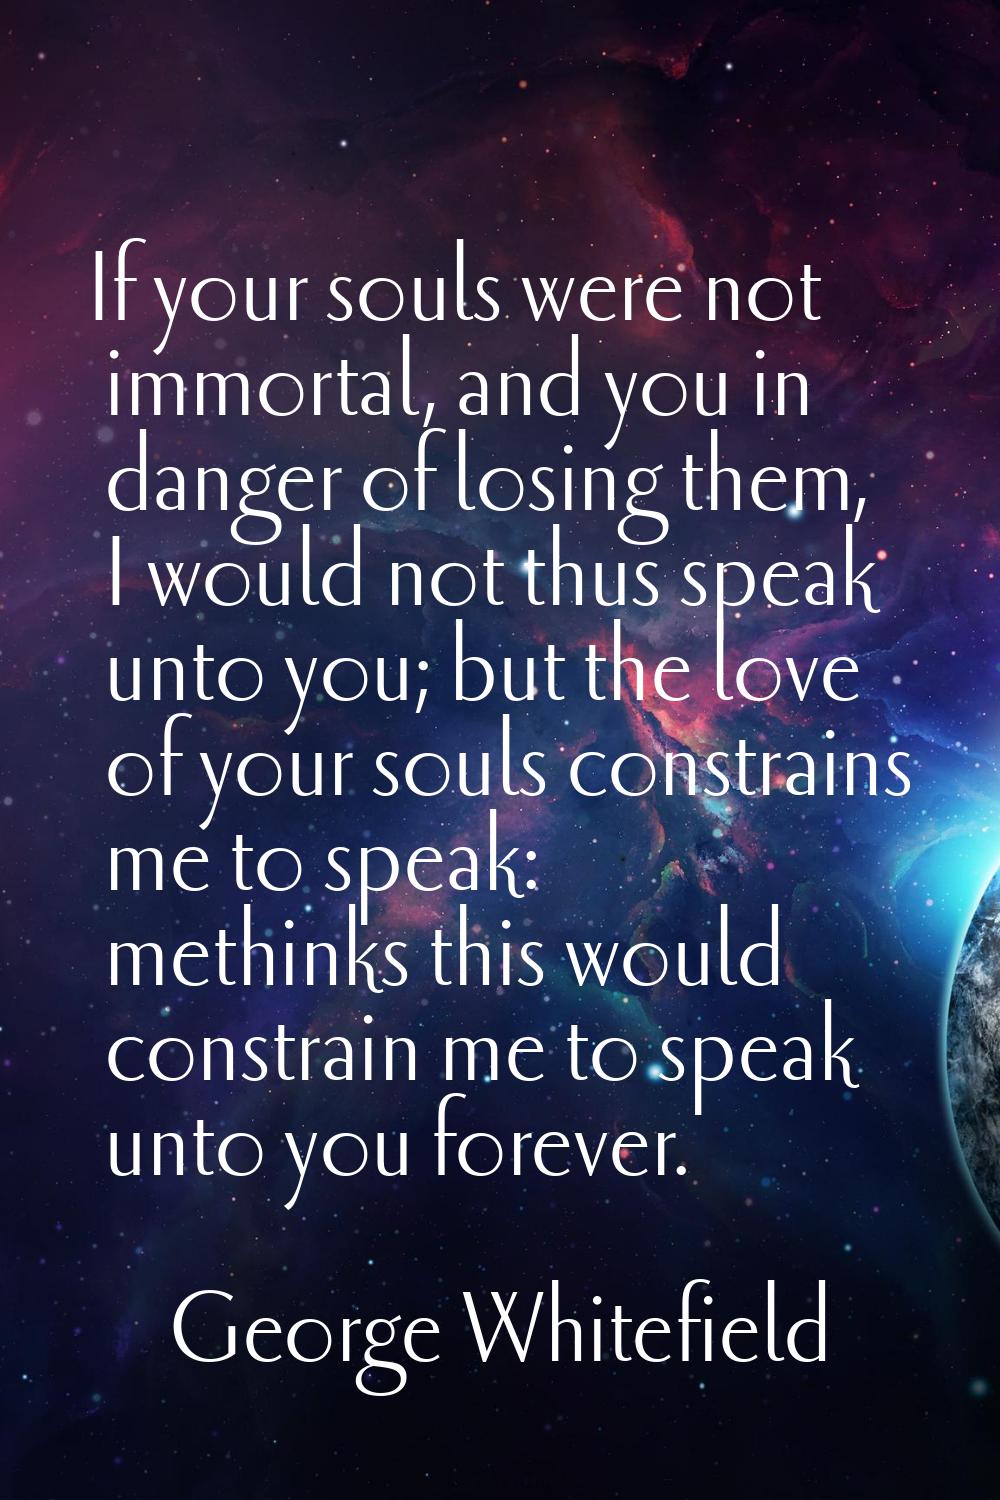 If your souls were not immortal, and you in danger of losing them, I would not thus speak unto you;